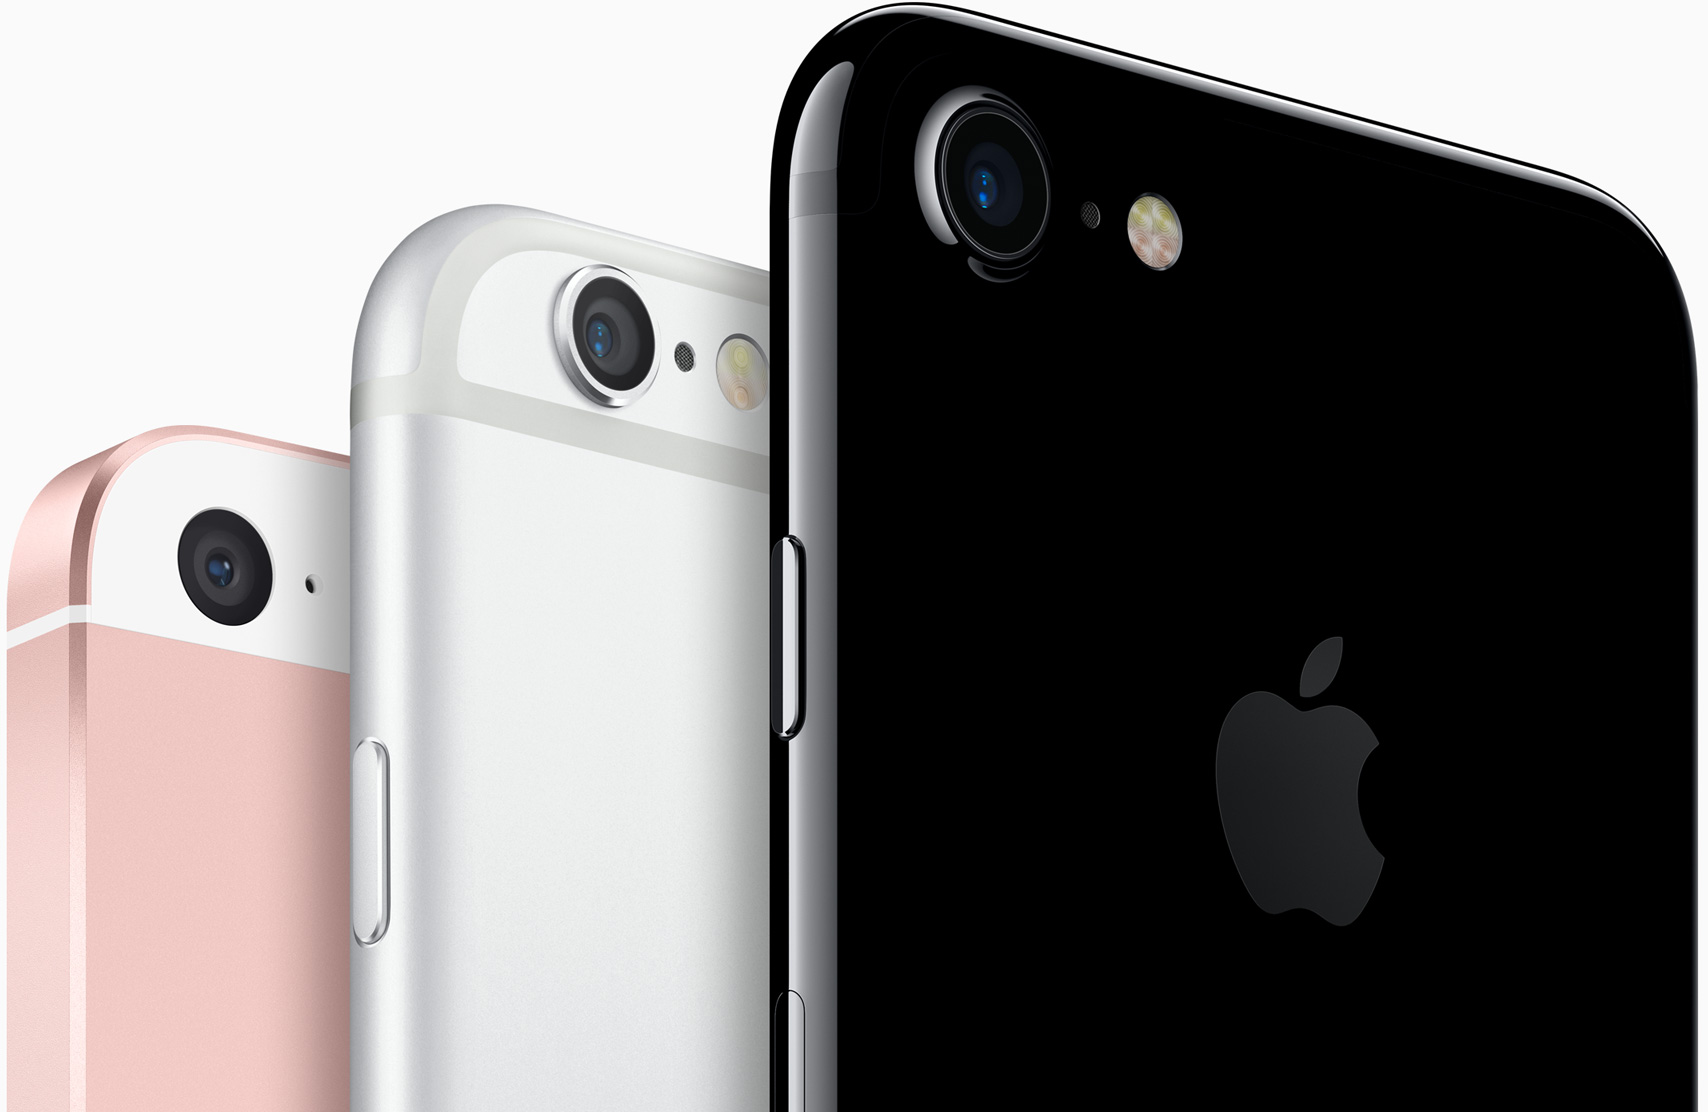 Apple iPhone 6S & iPhone 6S Plus Officially Announced